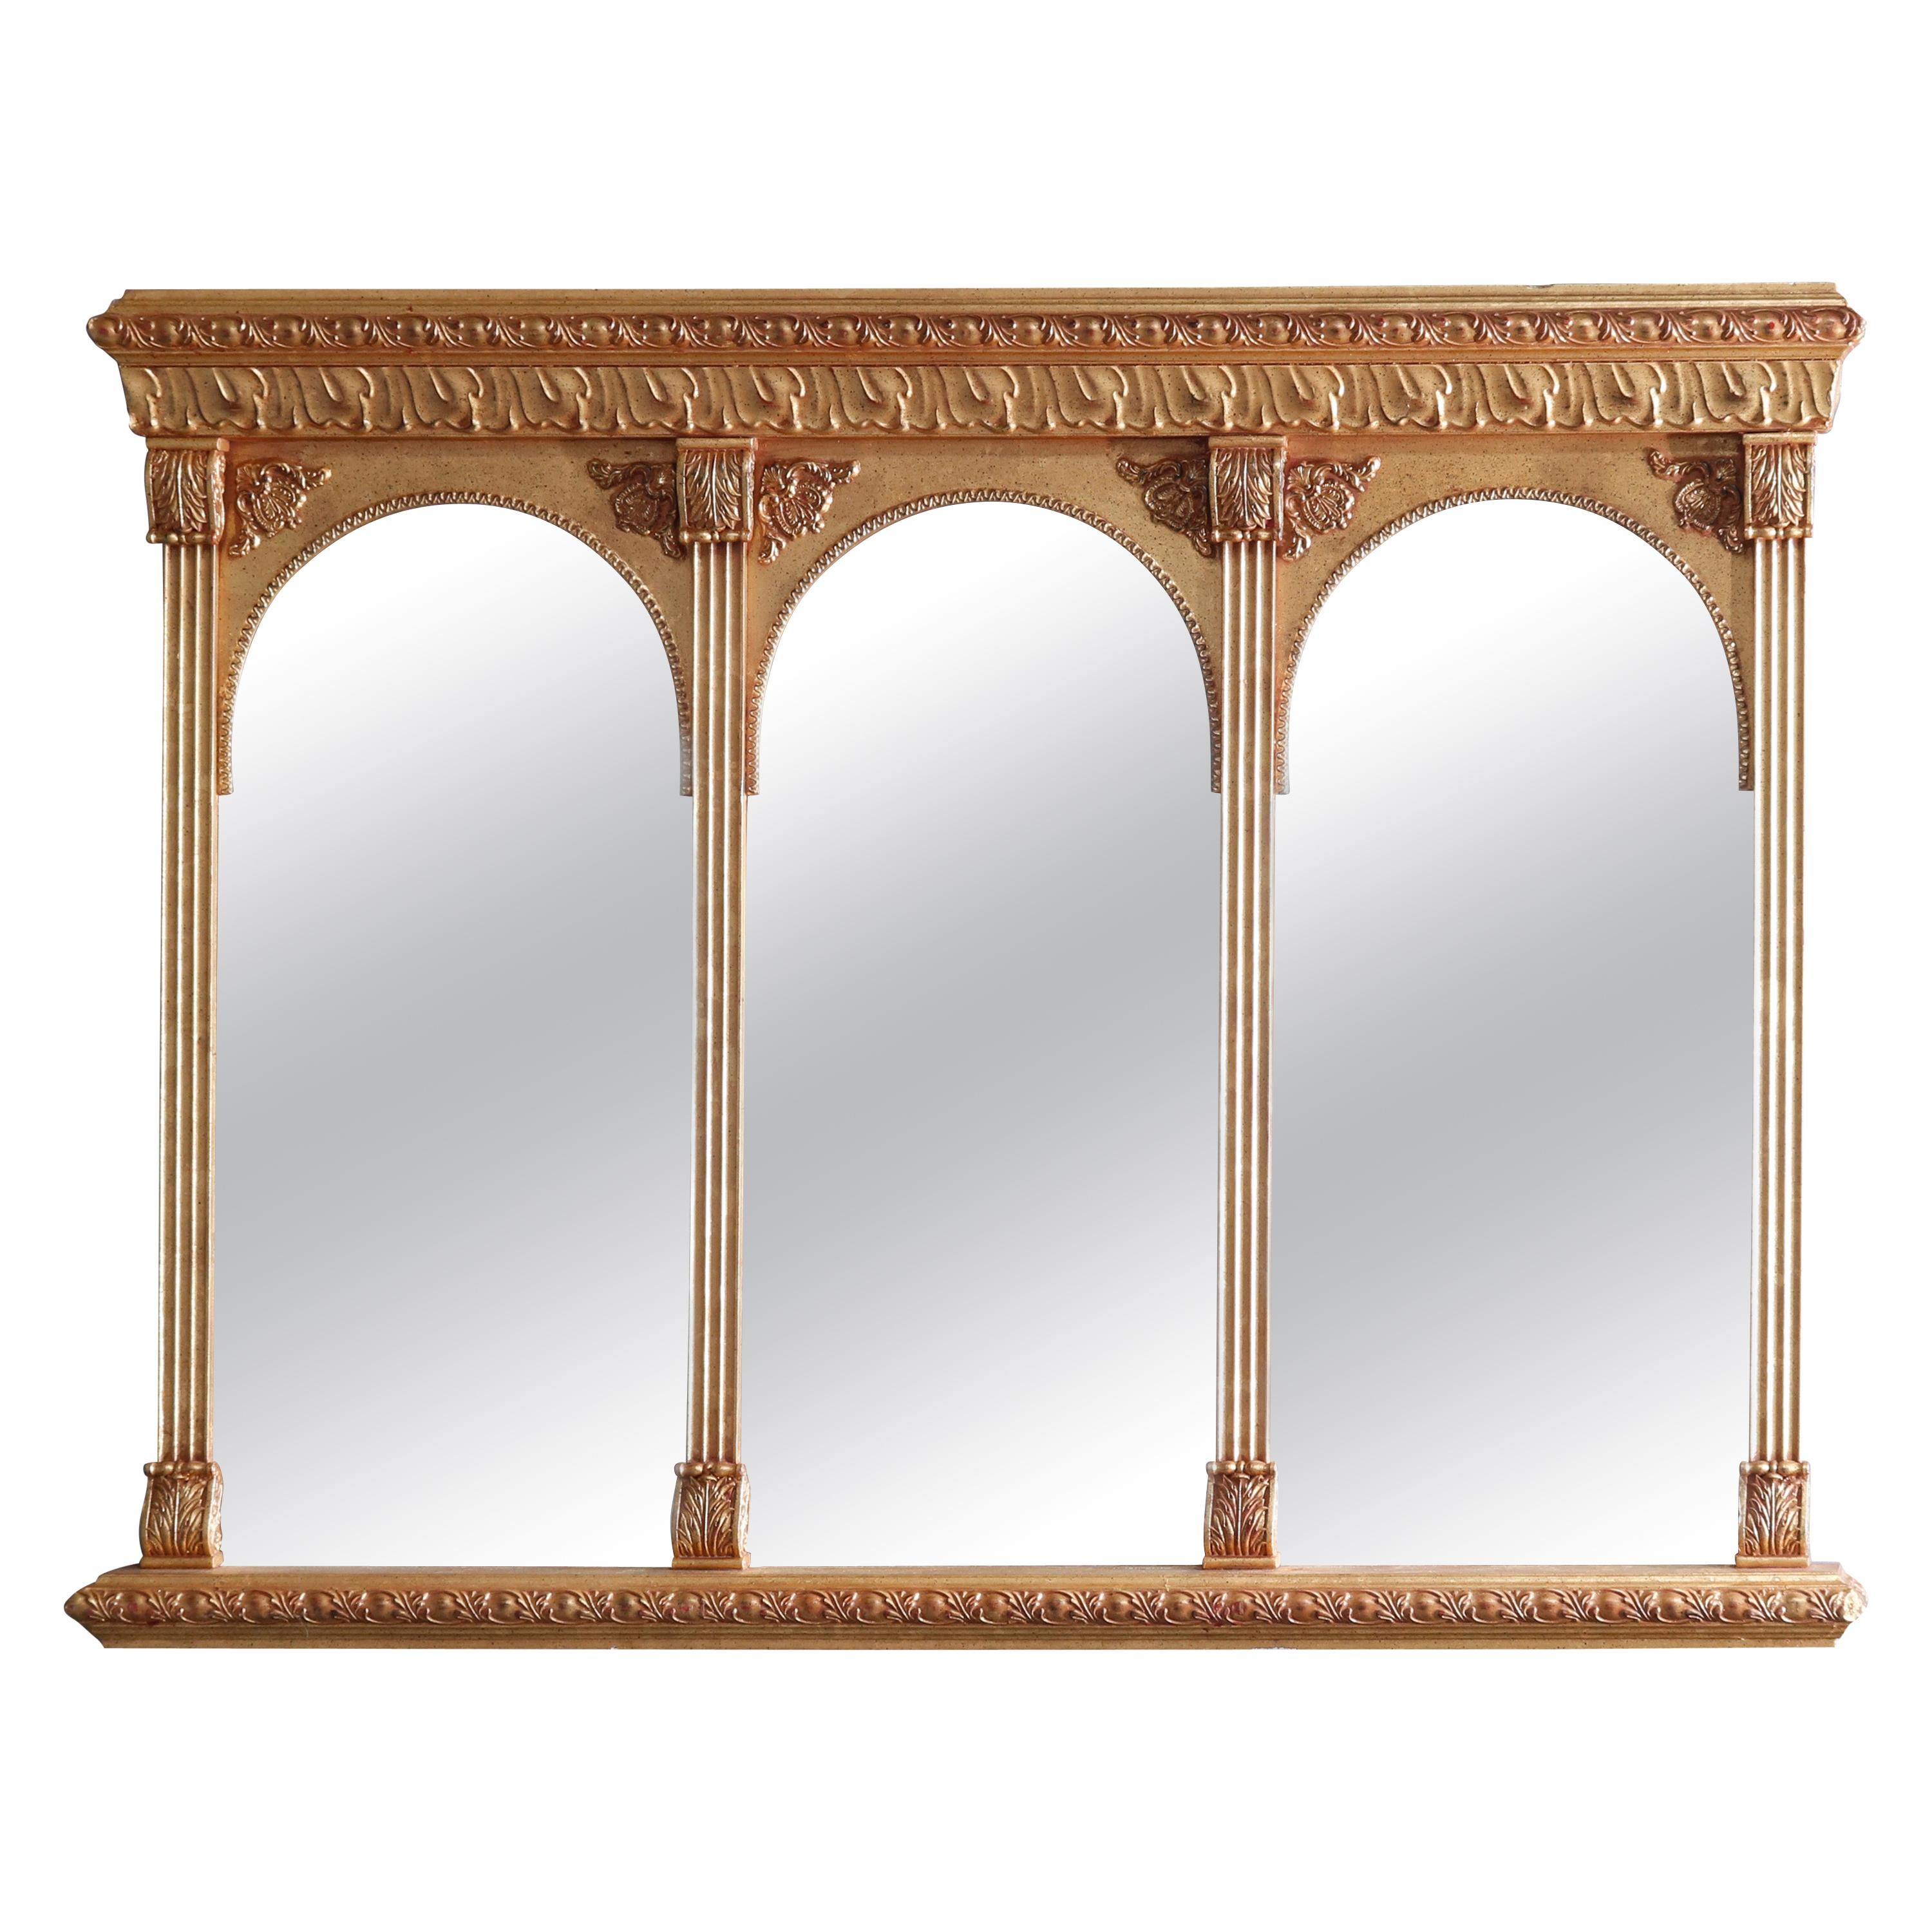 Vintage Classical Giltwood Triptych over Mantle Mirror, 20th Century